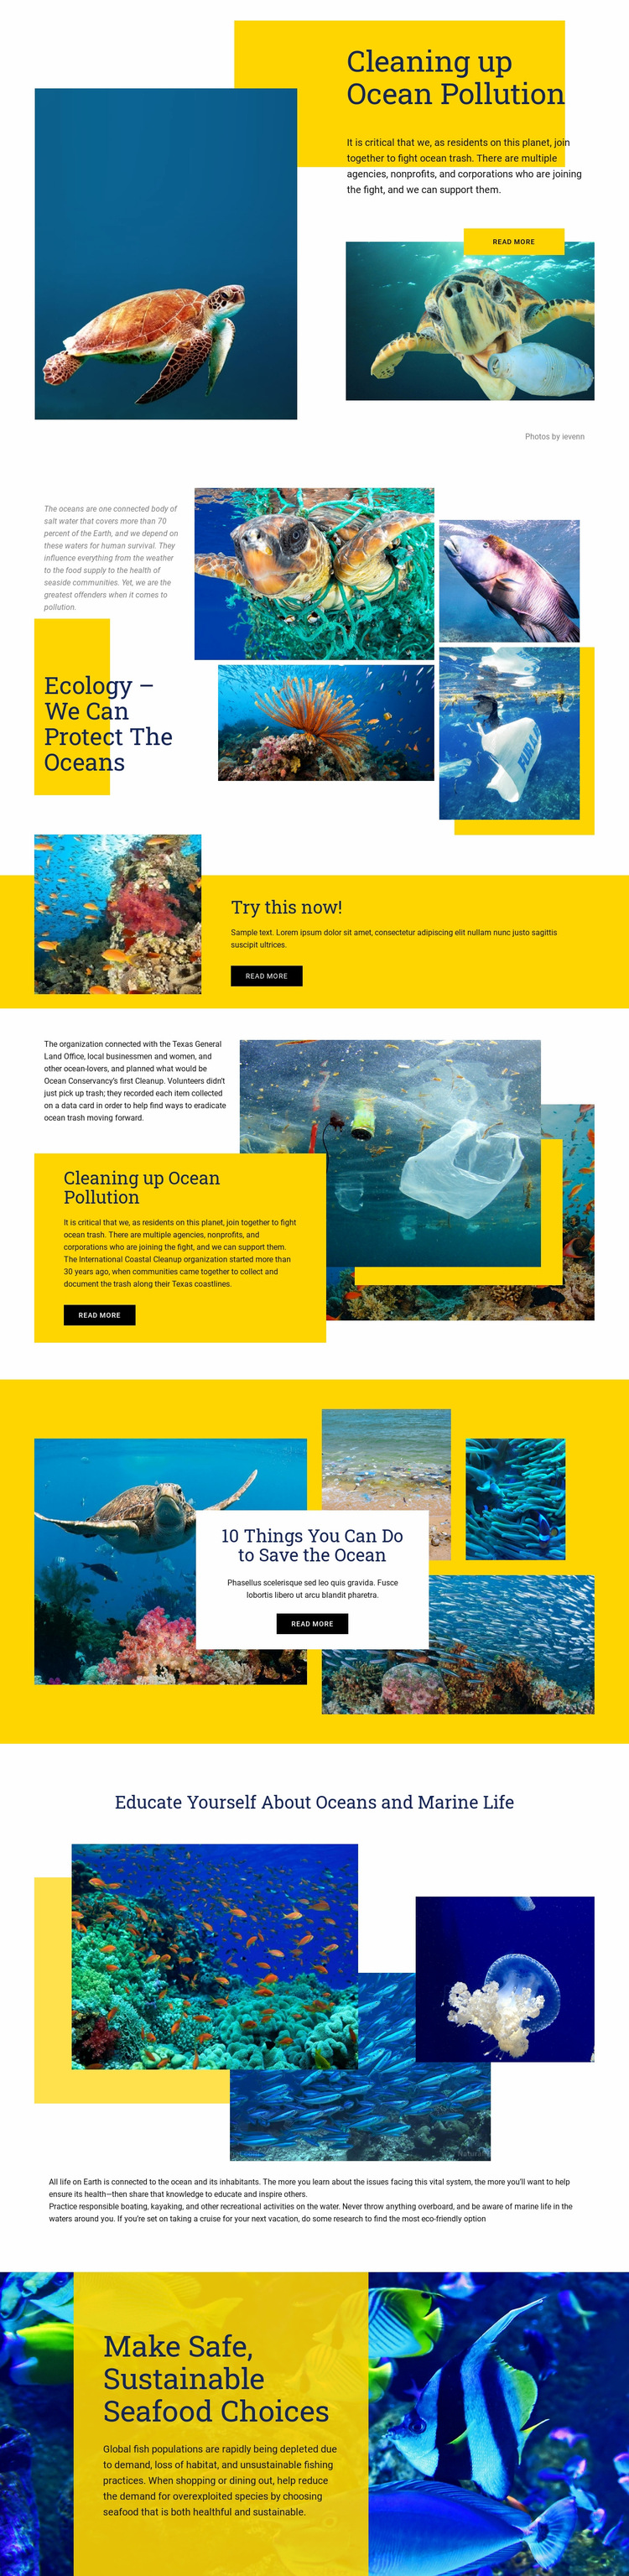 Protect The Oceans Web Page Design